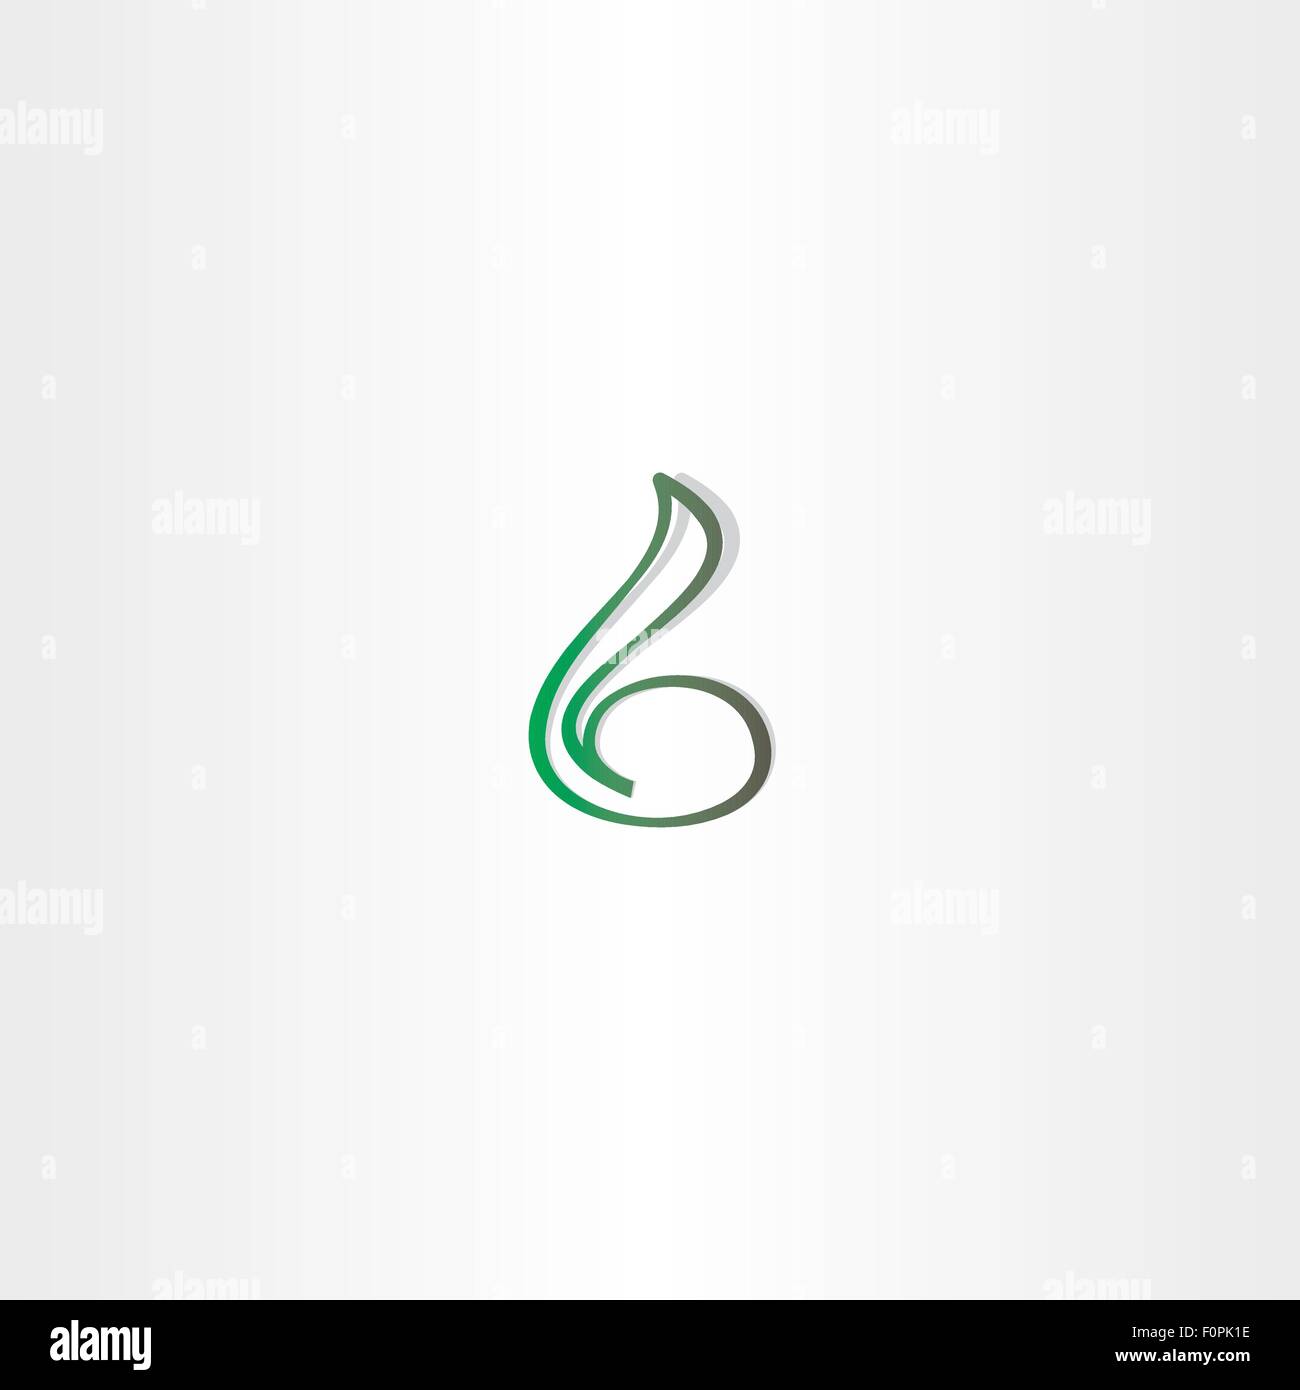 green small letter b icon vector element symbol Stock Vector